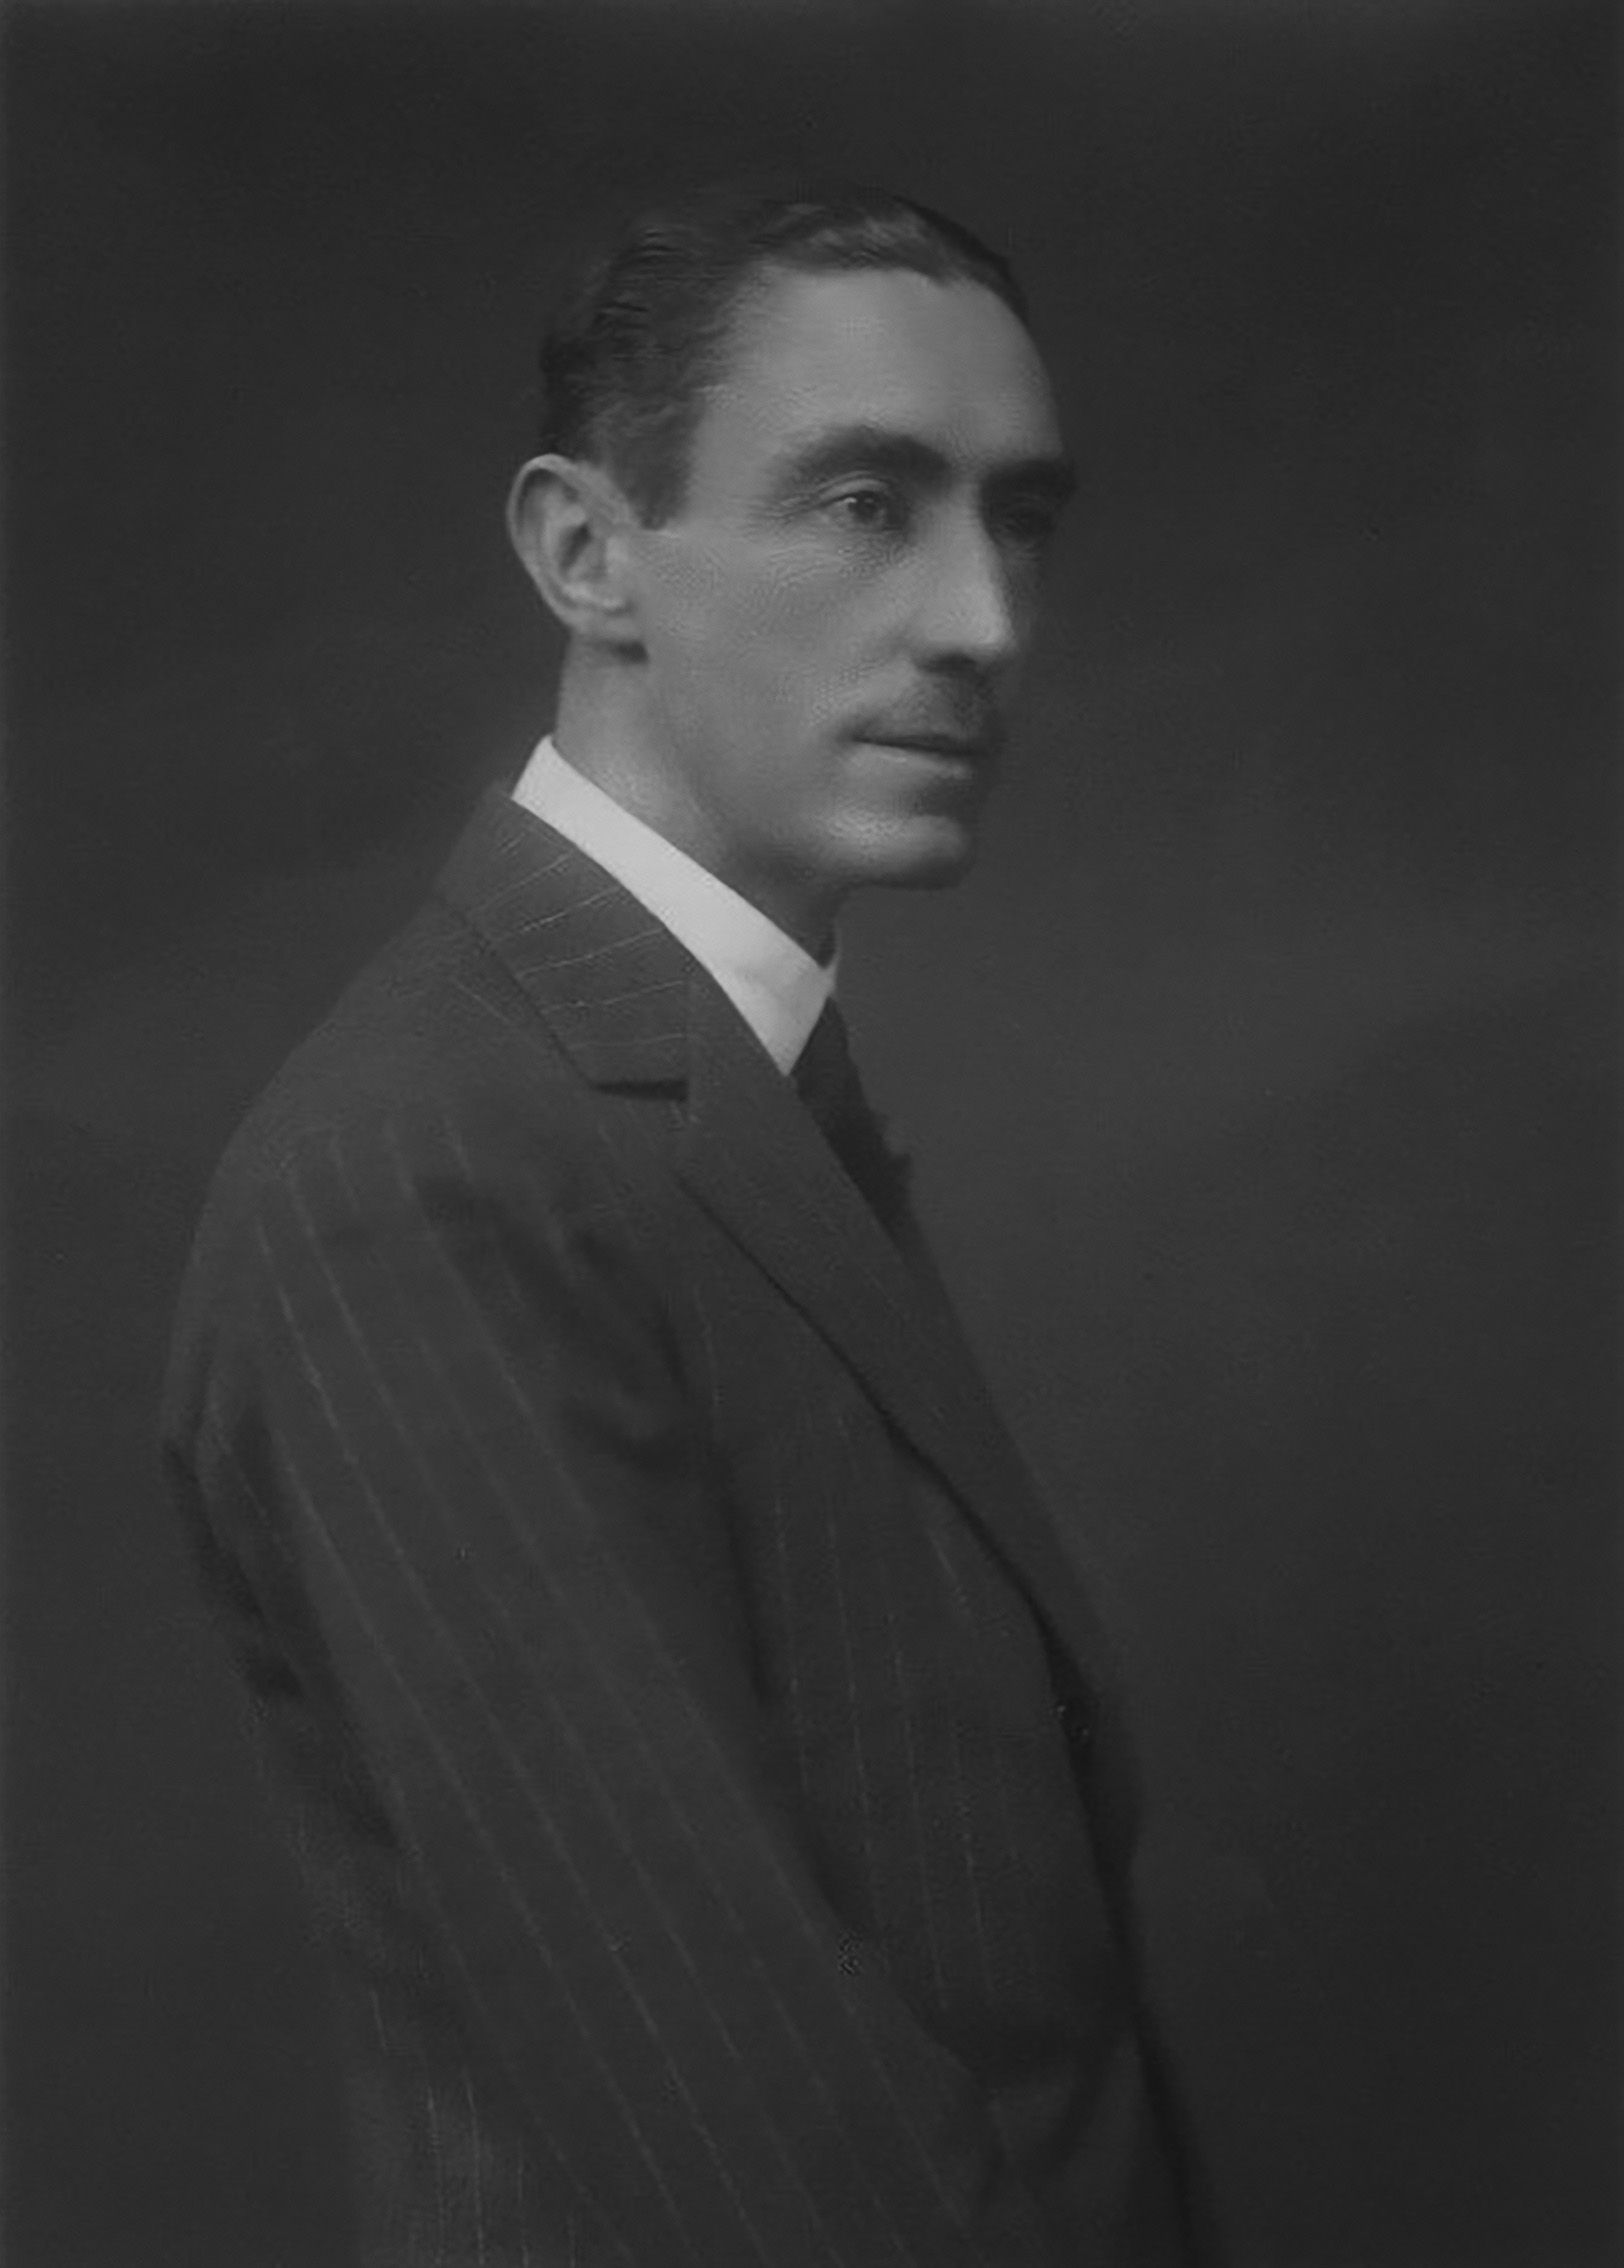 Sir Caryl Arthur Annesley, 12th Viscount Valentia, photographed in the 1930s.